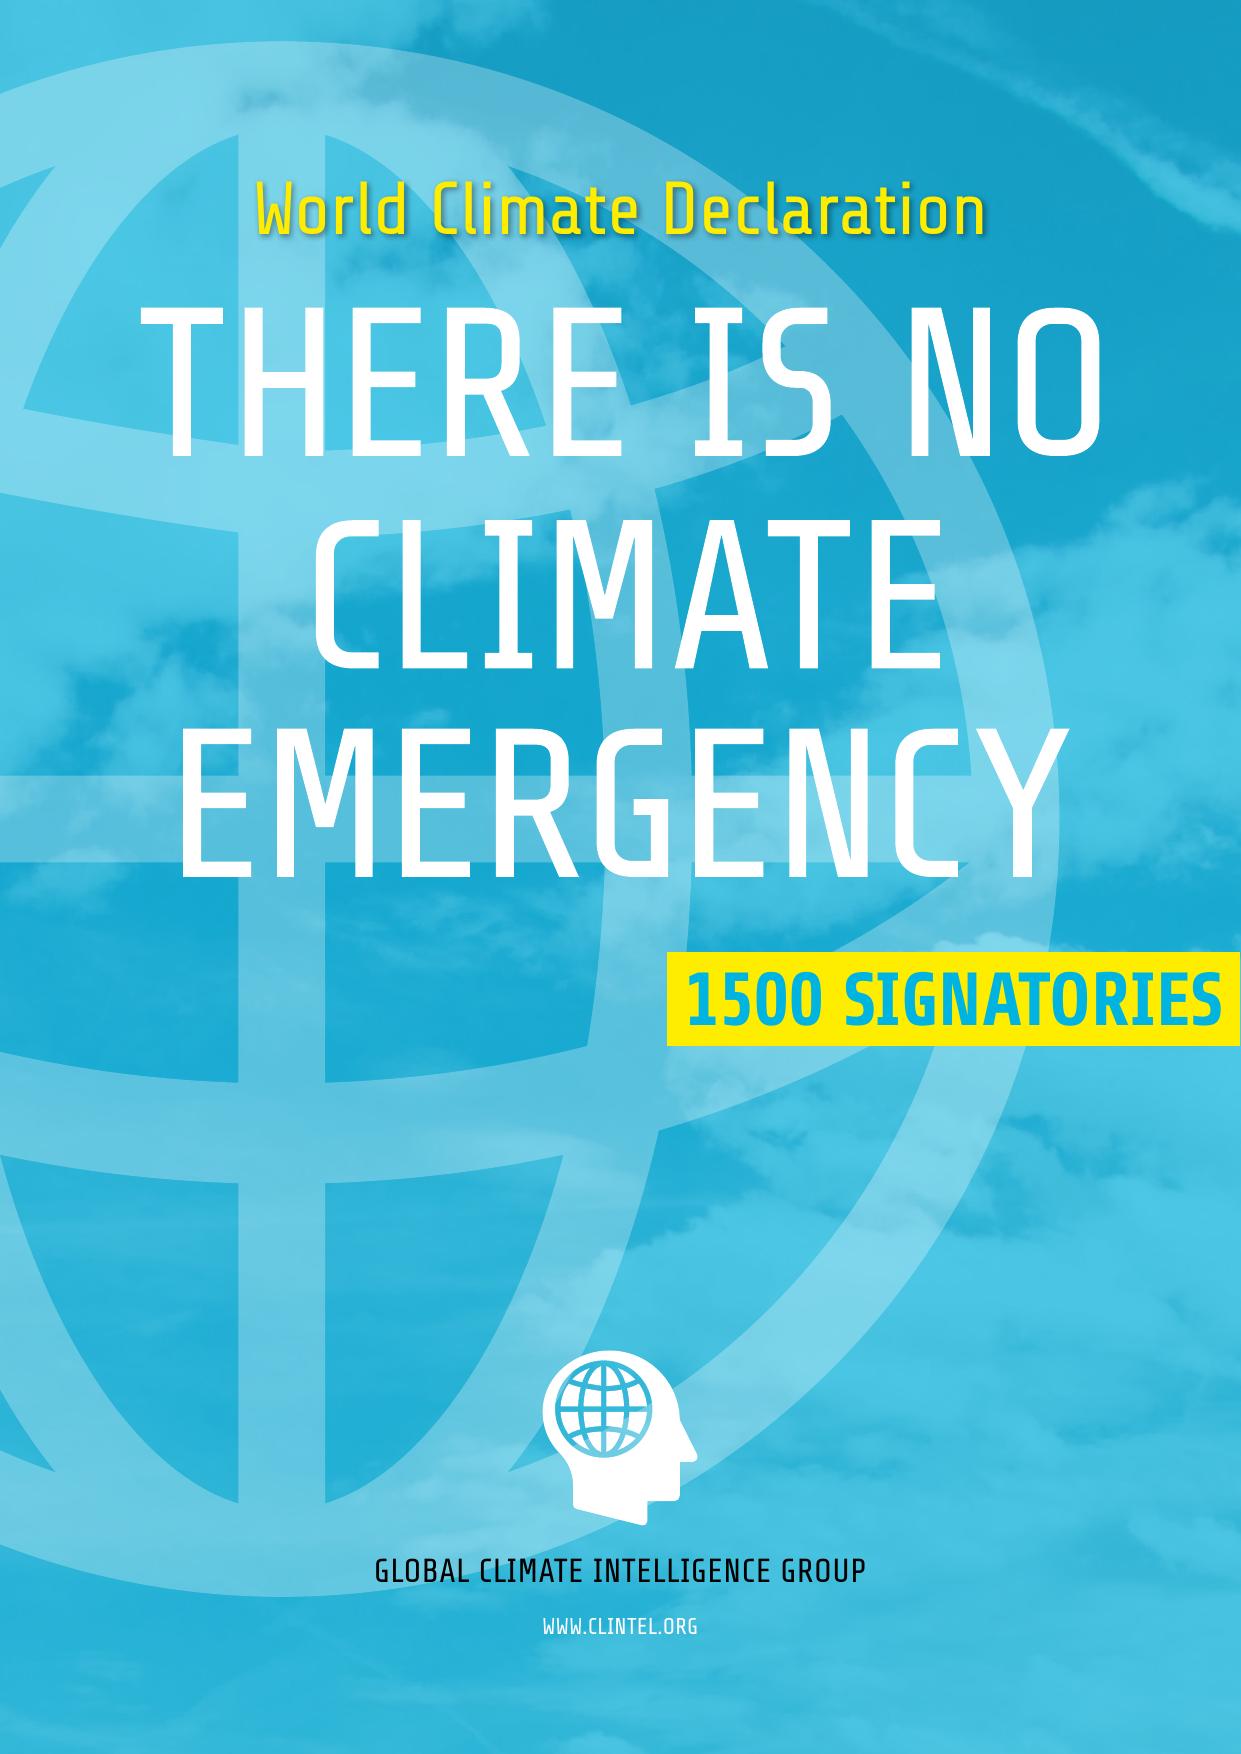 World Climate Declaration - There is no Climate Emergency